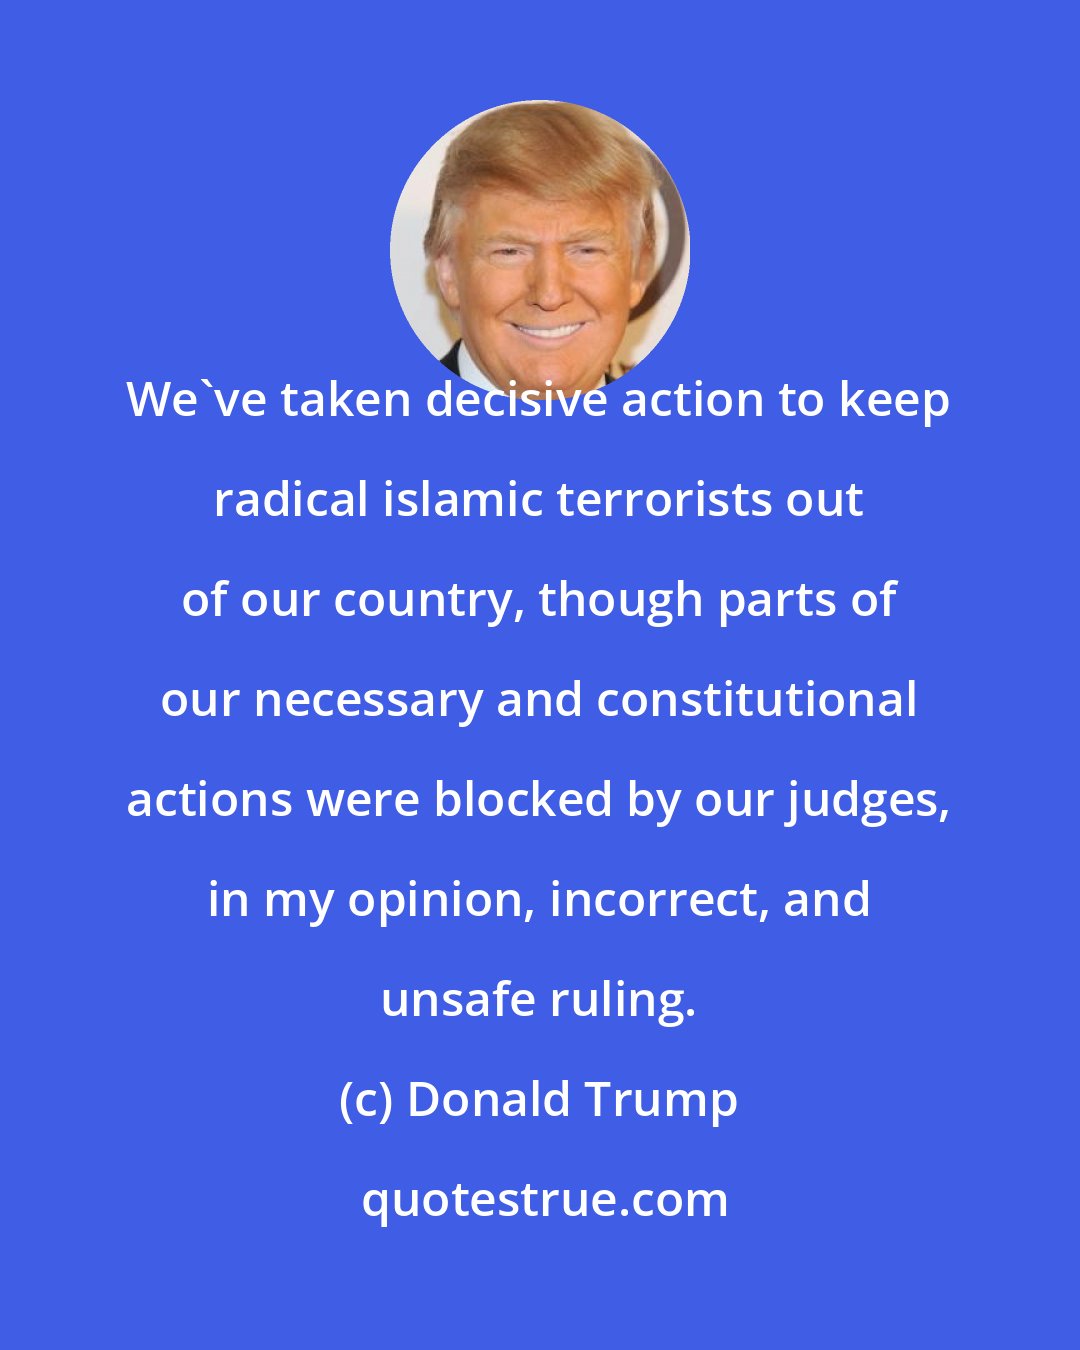 Donald Trump: We've taken decisive action to keep radical islamic terrorists out of our country, though parts of our necessary and constitutional actions were blocked by our judges, in my opinion, incorrect, and unsafe ruling.